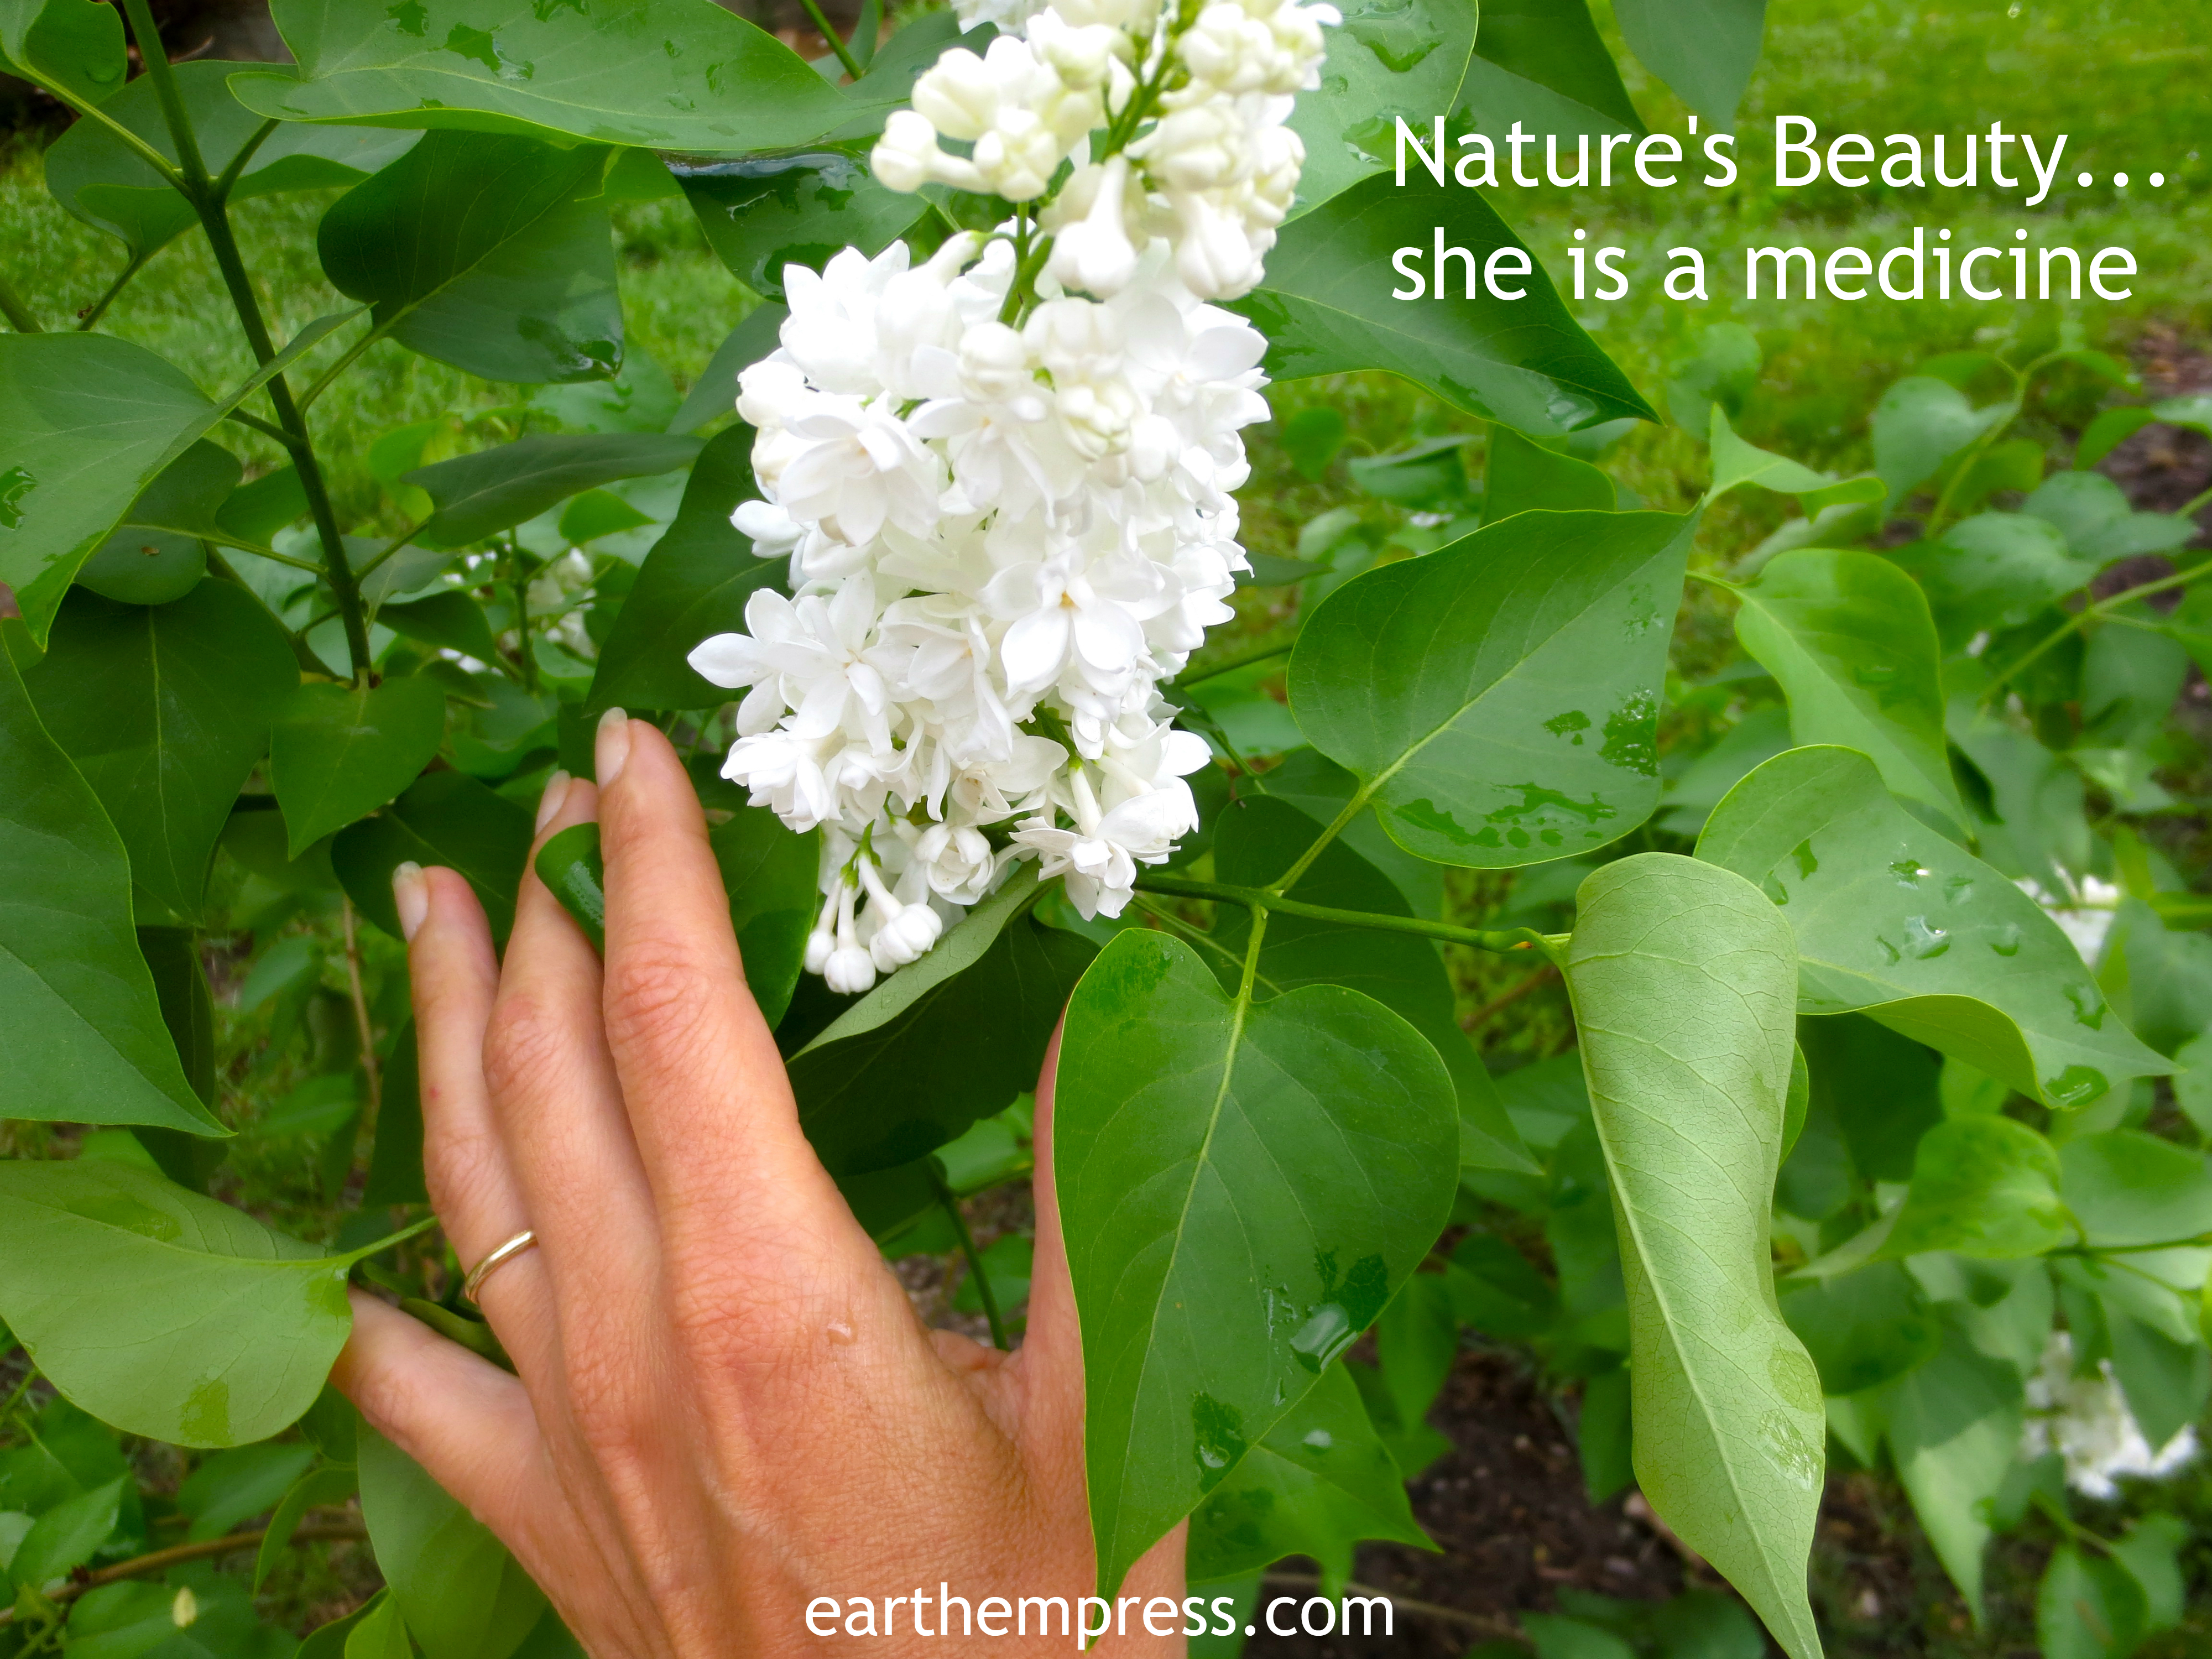 nature's beauty is a medicine